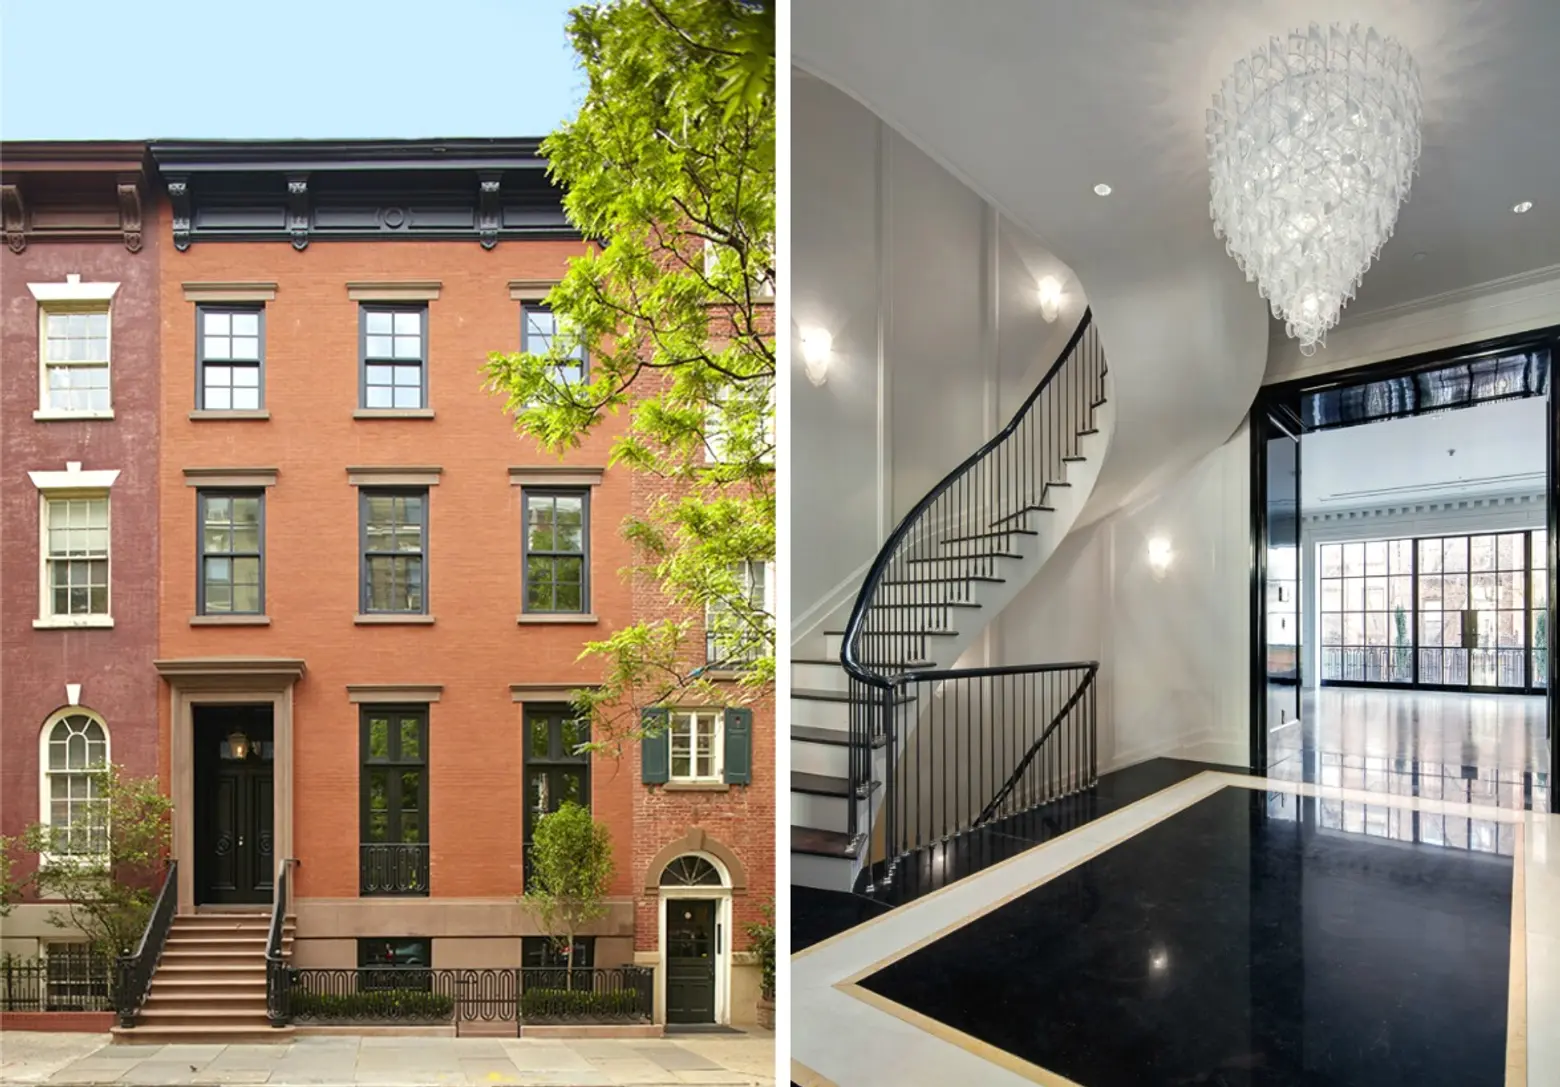 Rupert Murdoch’s Multi-Terraced West Village Townhouse Sells for $27.5M in Just Five Months